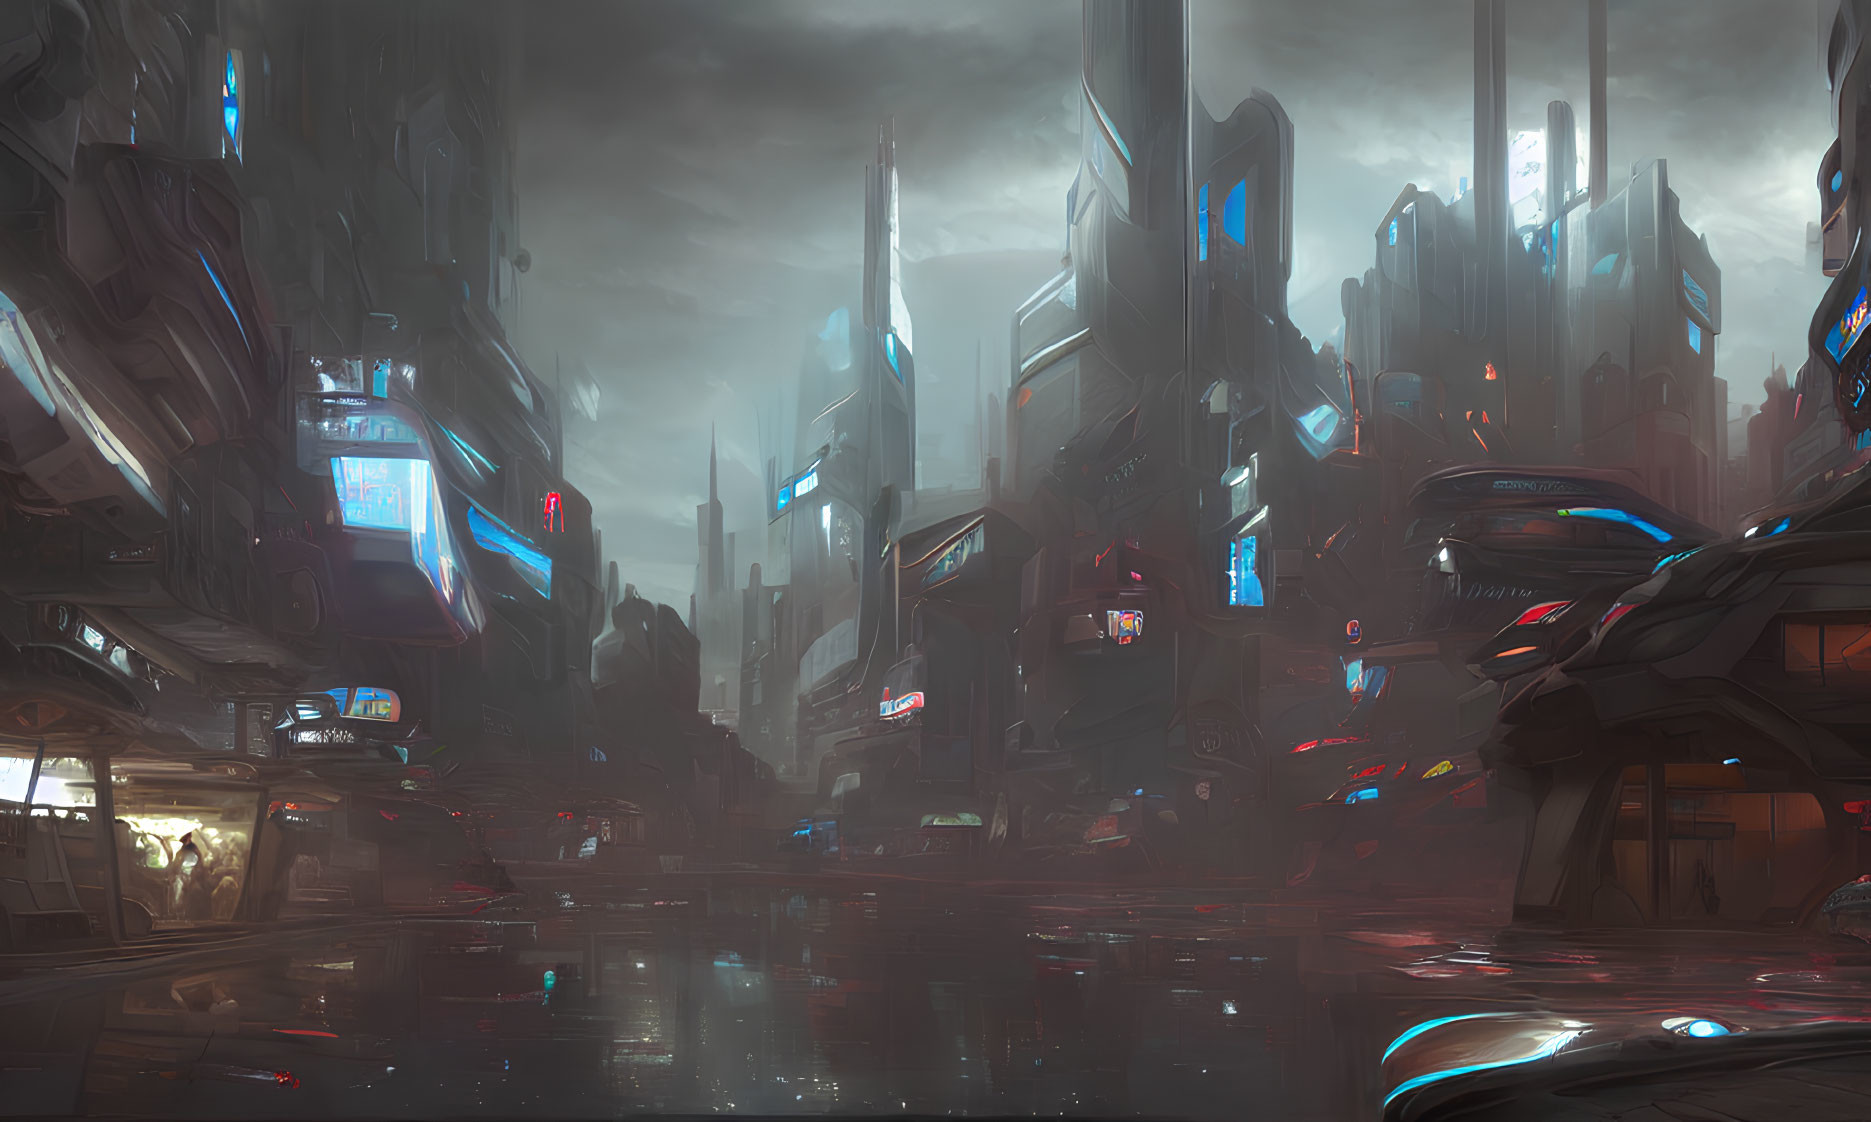 Futuristic cityscape with sleek skyscrapers and flying vehicles